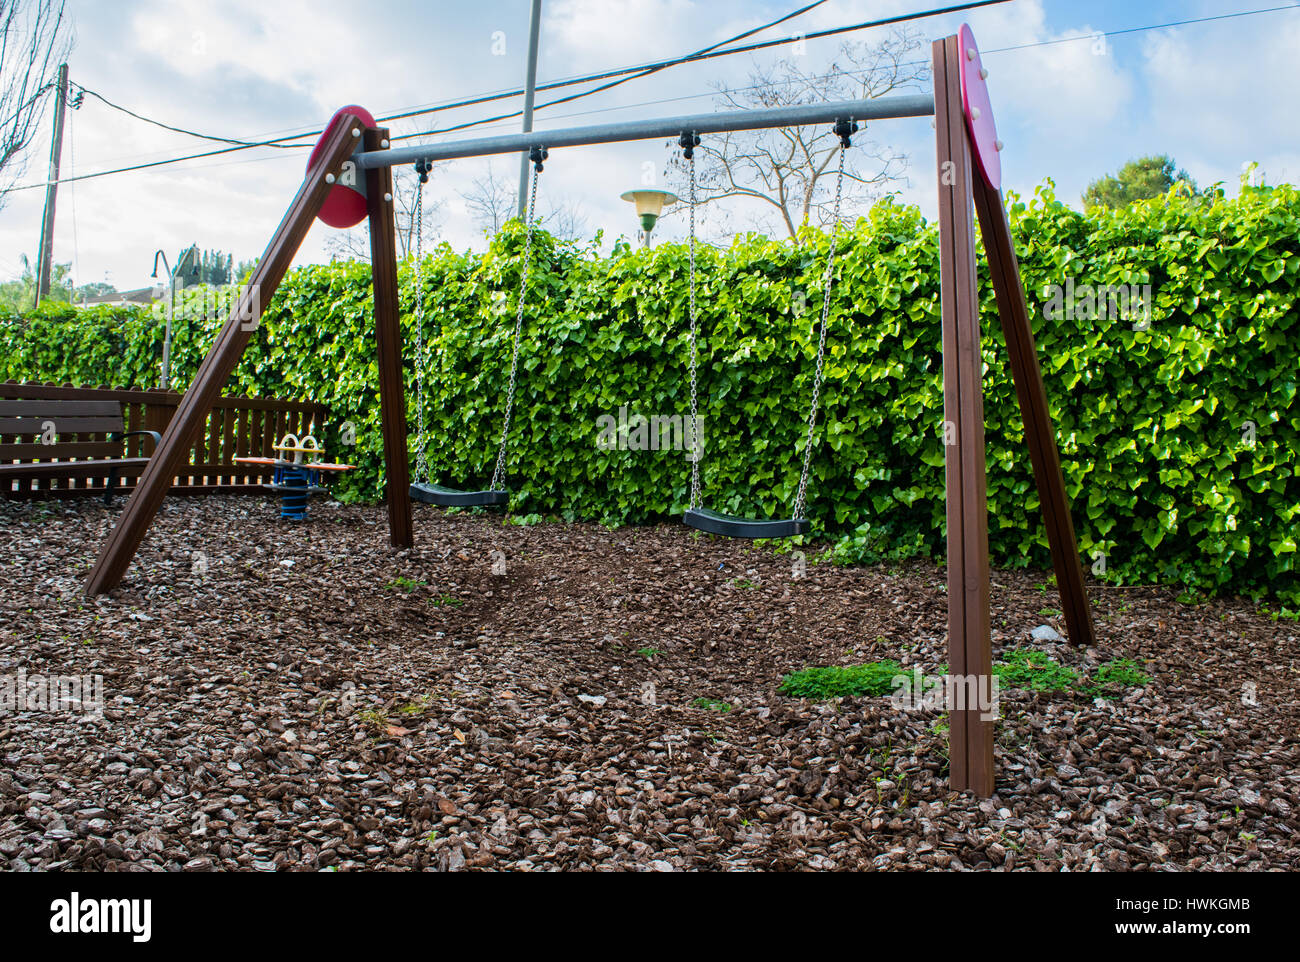 Empty swings with chains swaying at playground for child, ivy on the background Stock Photo